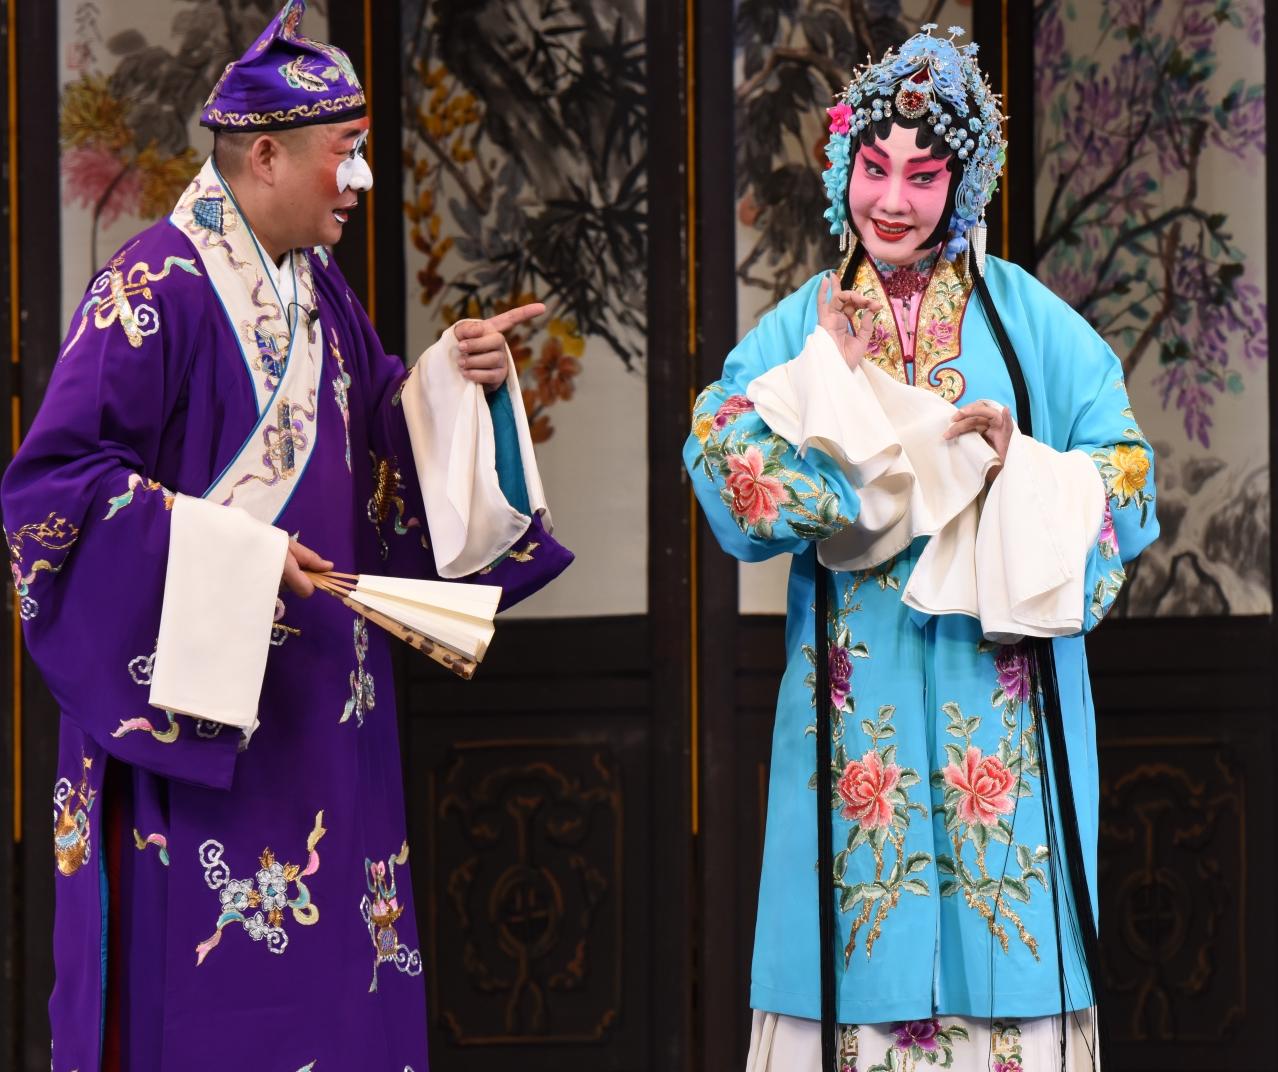 The Leisure and Cultural Services Department has invited the Peking Opera Theatre of Beijing to come to Hong Kong in mid-June to stage three performances of iconic plays, which highlight the artistic legacy of Peking opera master Zhang Junqiu, famed for his qingyi roles, as the opening programme of this year's Chinese Opera Festival. Photo shows a scene of "Poetry Contest".